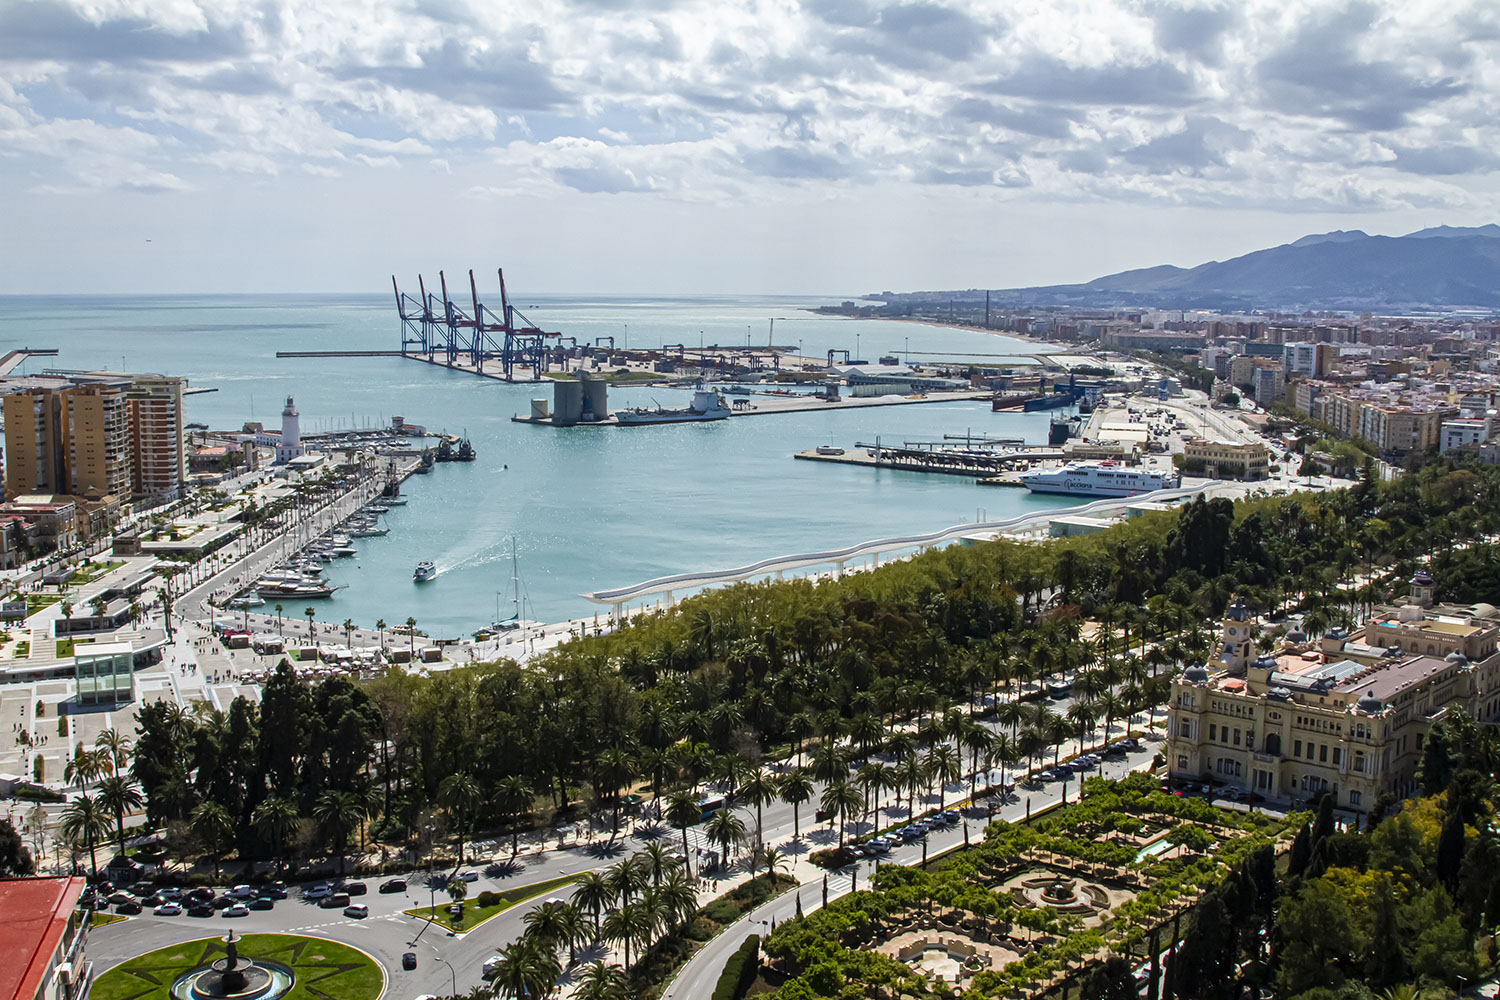 Spain,Port and main Harbour in Malaga, taken from the footpath to Monte Gibralfaro.